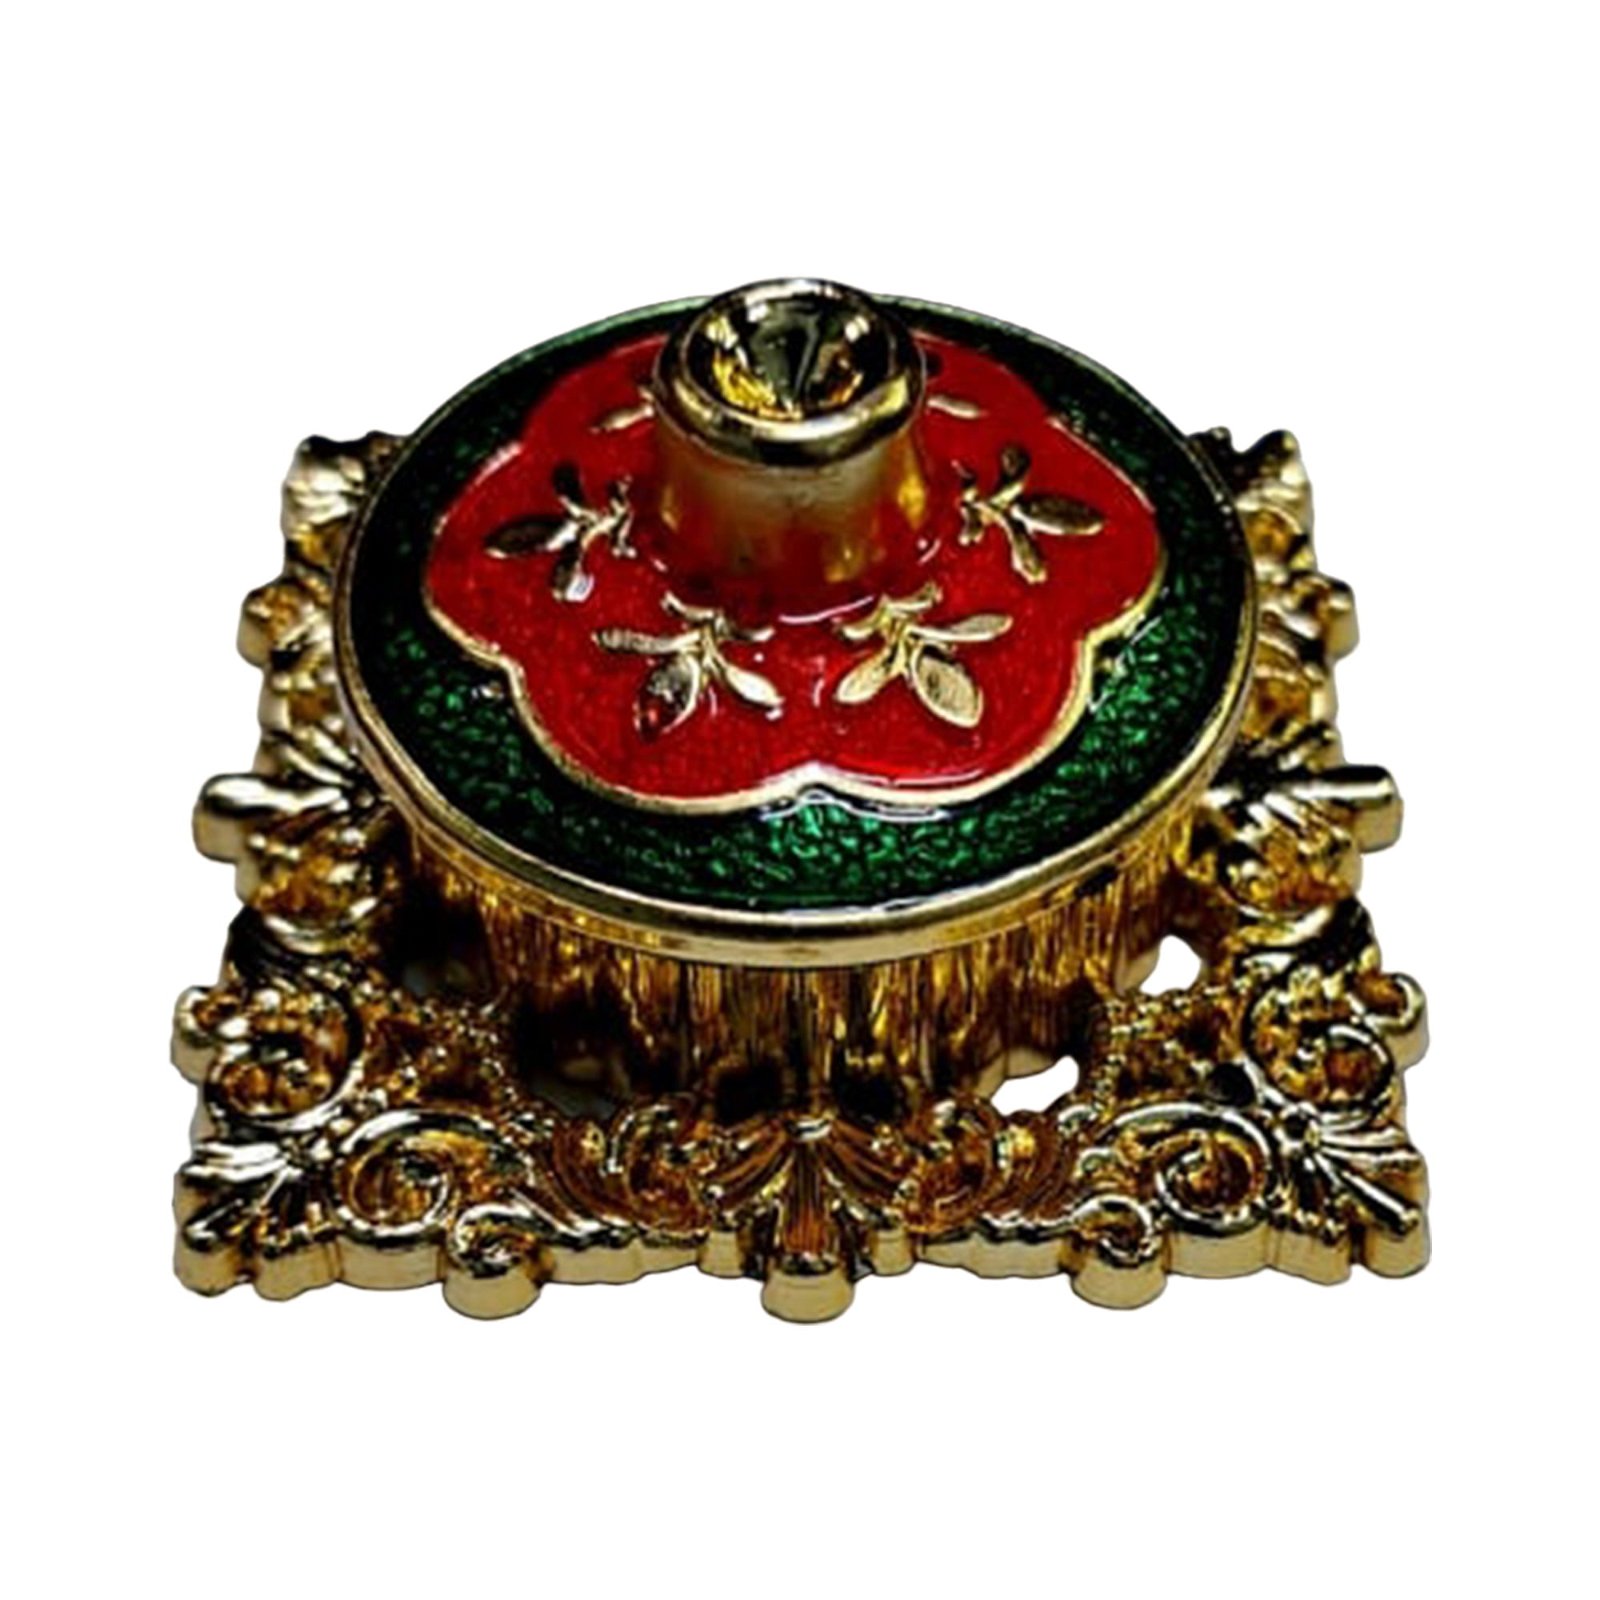 Buy Effigy onlinehub Brass Kuber Diya Engraved Design Diyas for Pooja and Return  Gifts Deepak Diya Oil Lamp for Puja Home Decor (2) Online at Low Prices in  India - Amazon.in